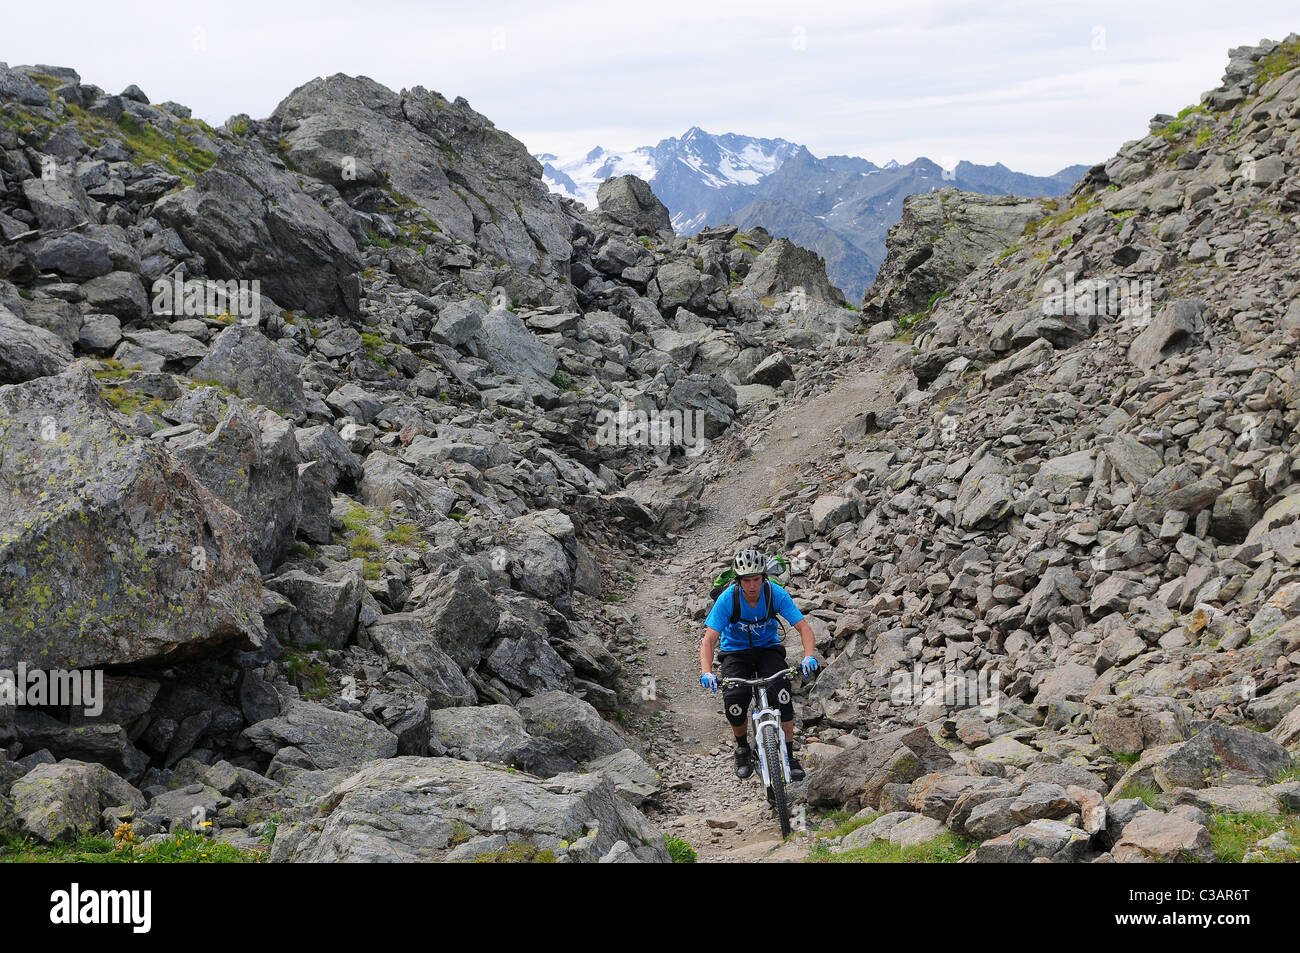 A mountain biker rides across rocky terrain at altitude in the French ski resort of Courchevel. Stock Photo